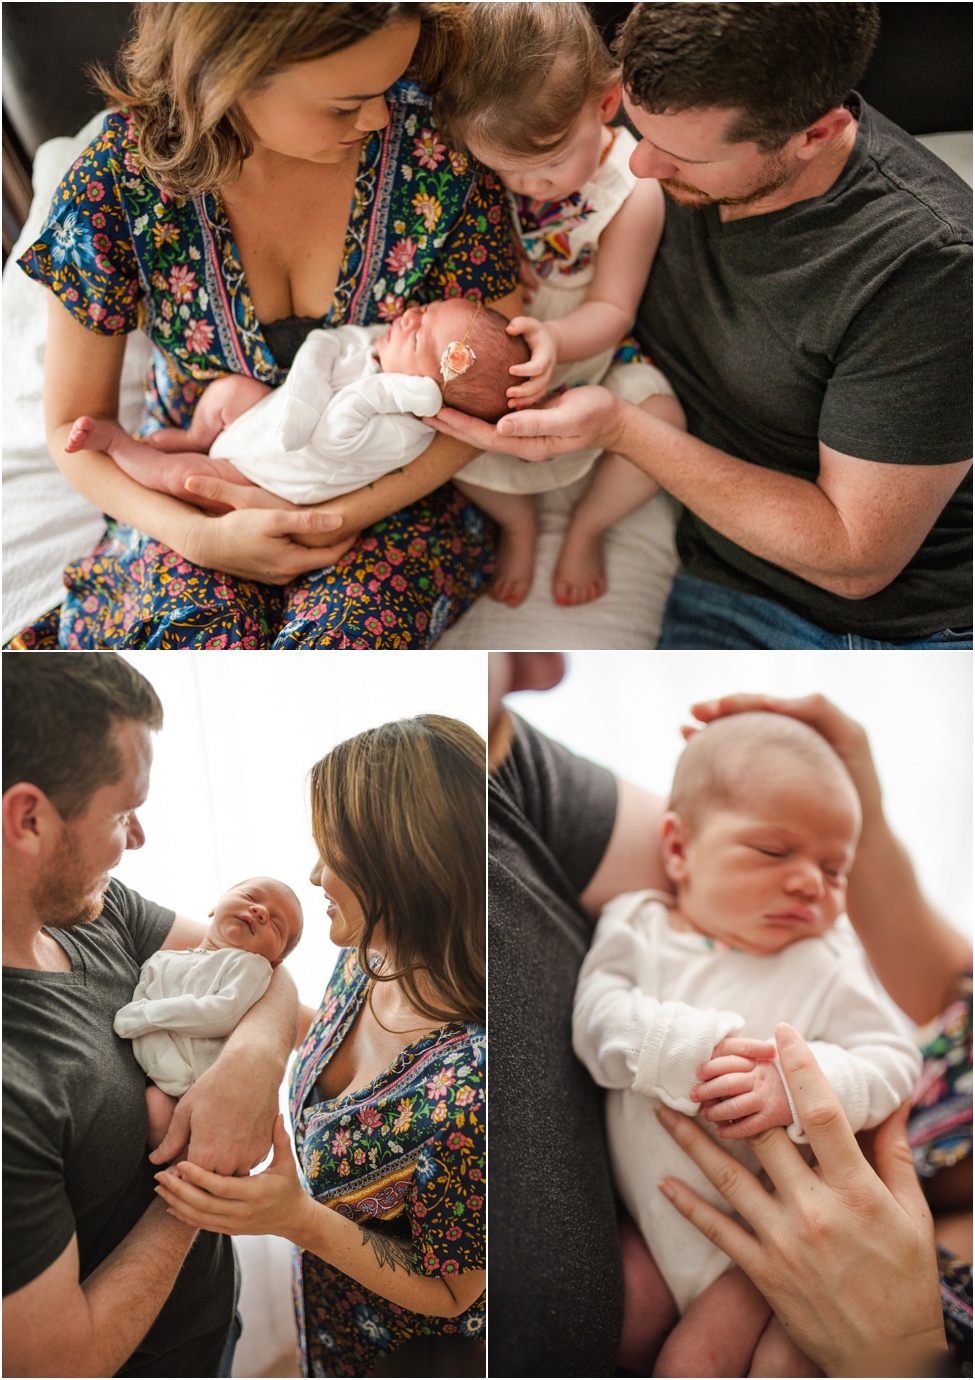 Sweetest newborn session. Jacksonville newborn and family photographer Florida. Big sister loving on her new sibling. First 48 hours at home baby session. Family Ponte Vedra, Atlantic Beach, St. Augustine, Florida